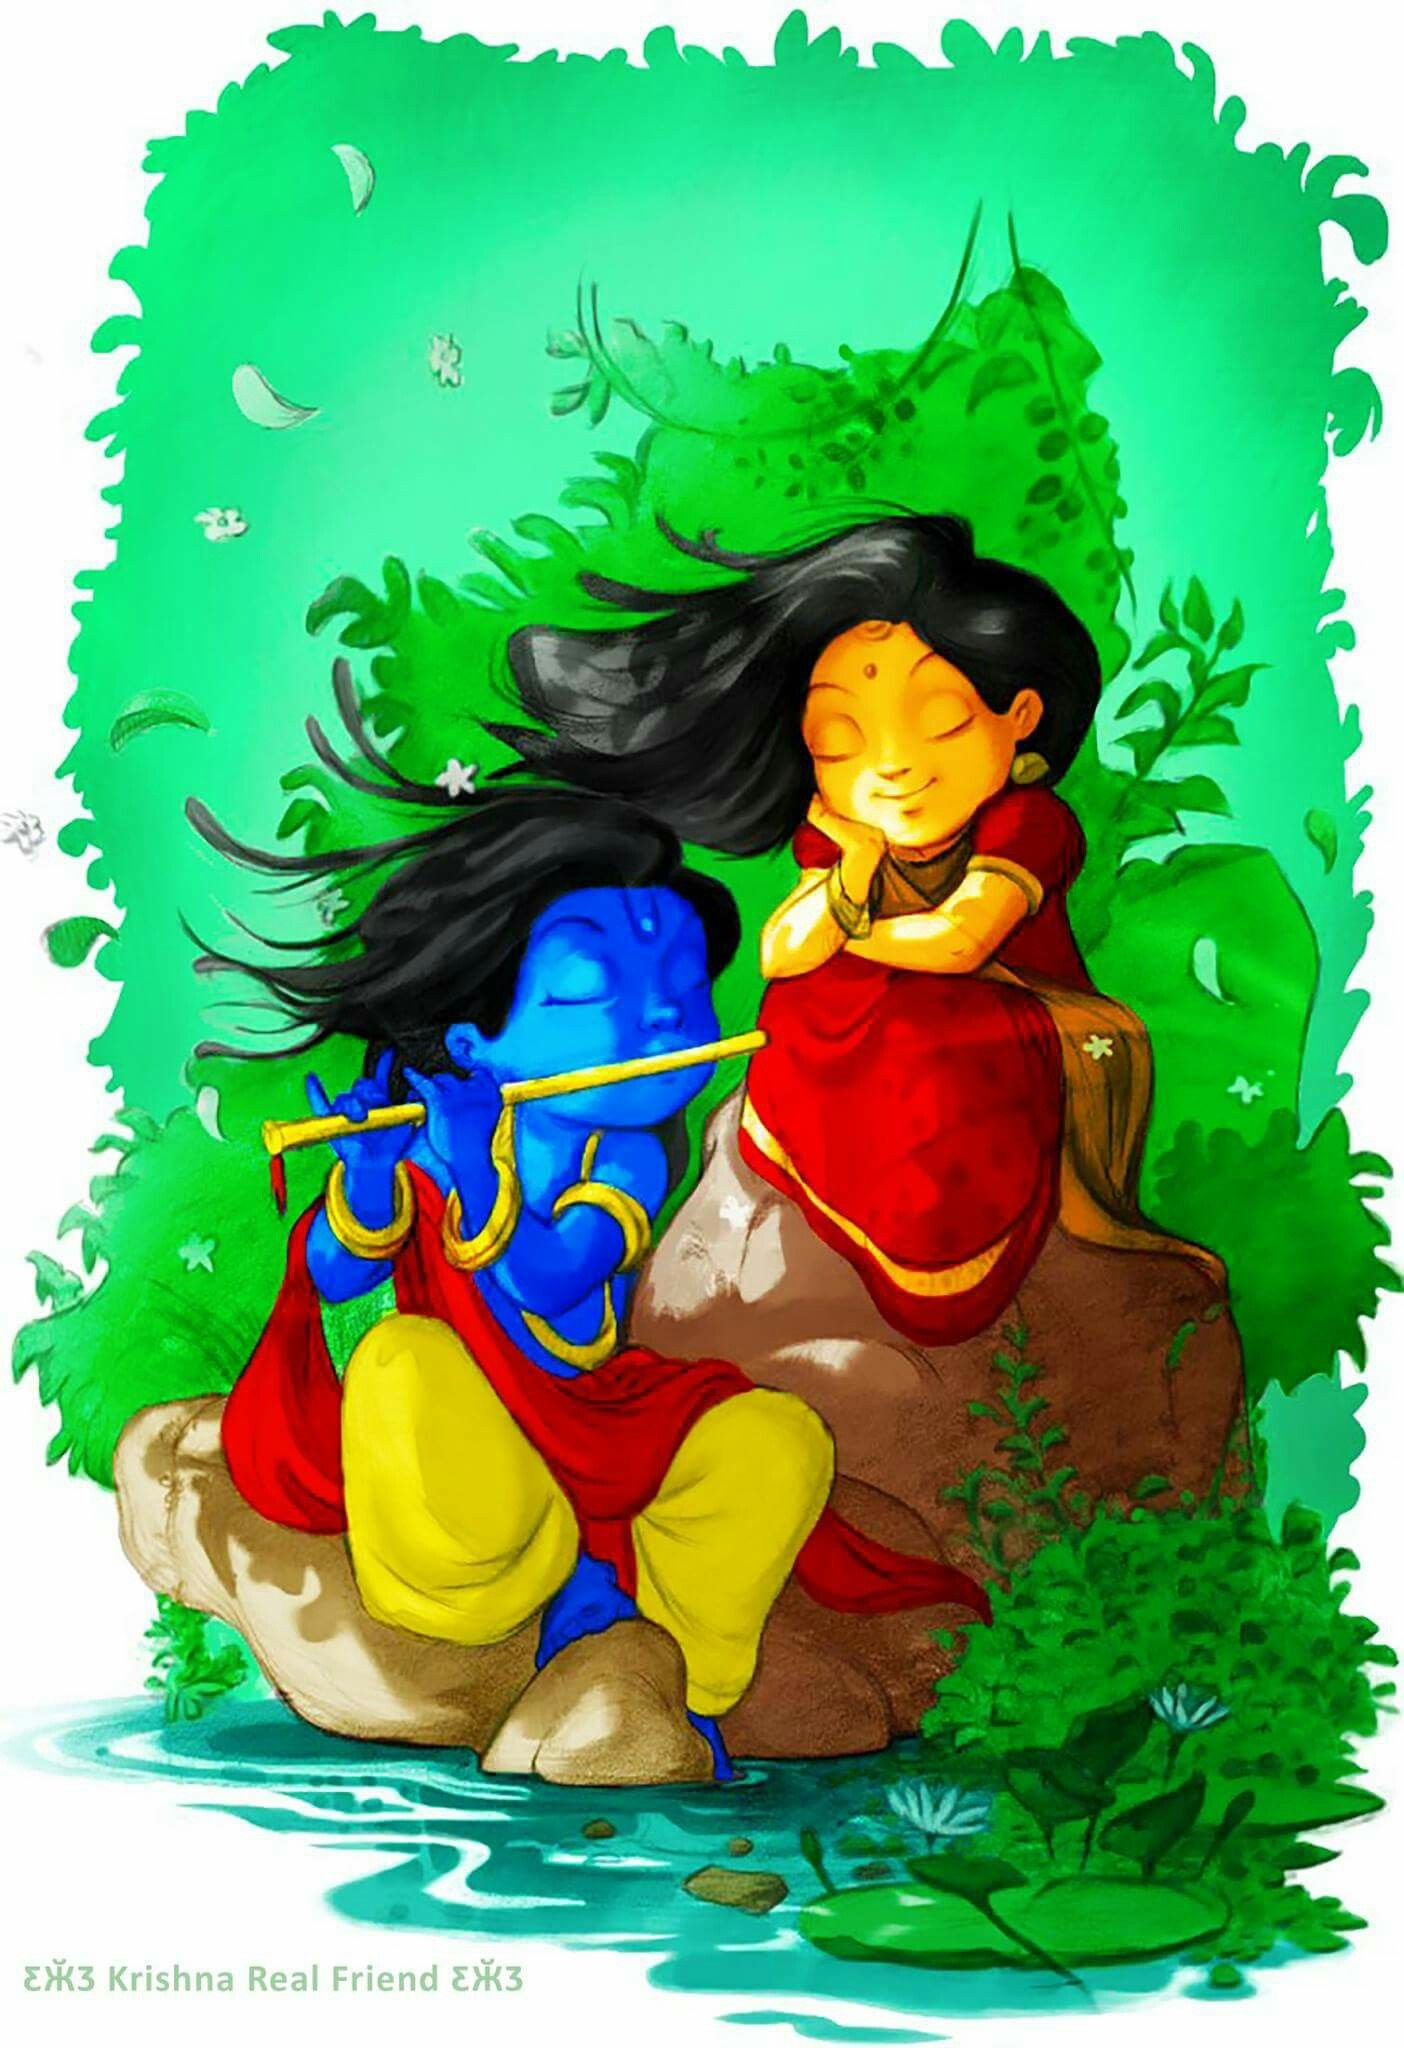 Little Krishna And Radha Wallpapers - Wallpaper Cave